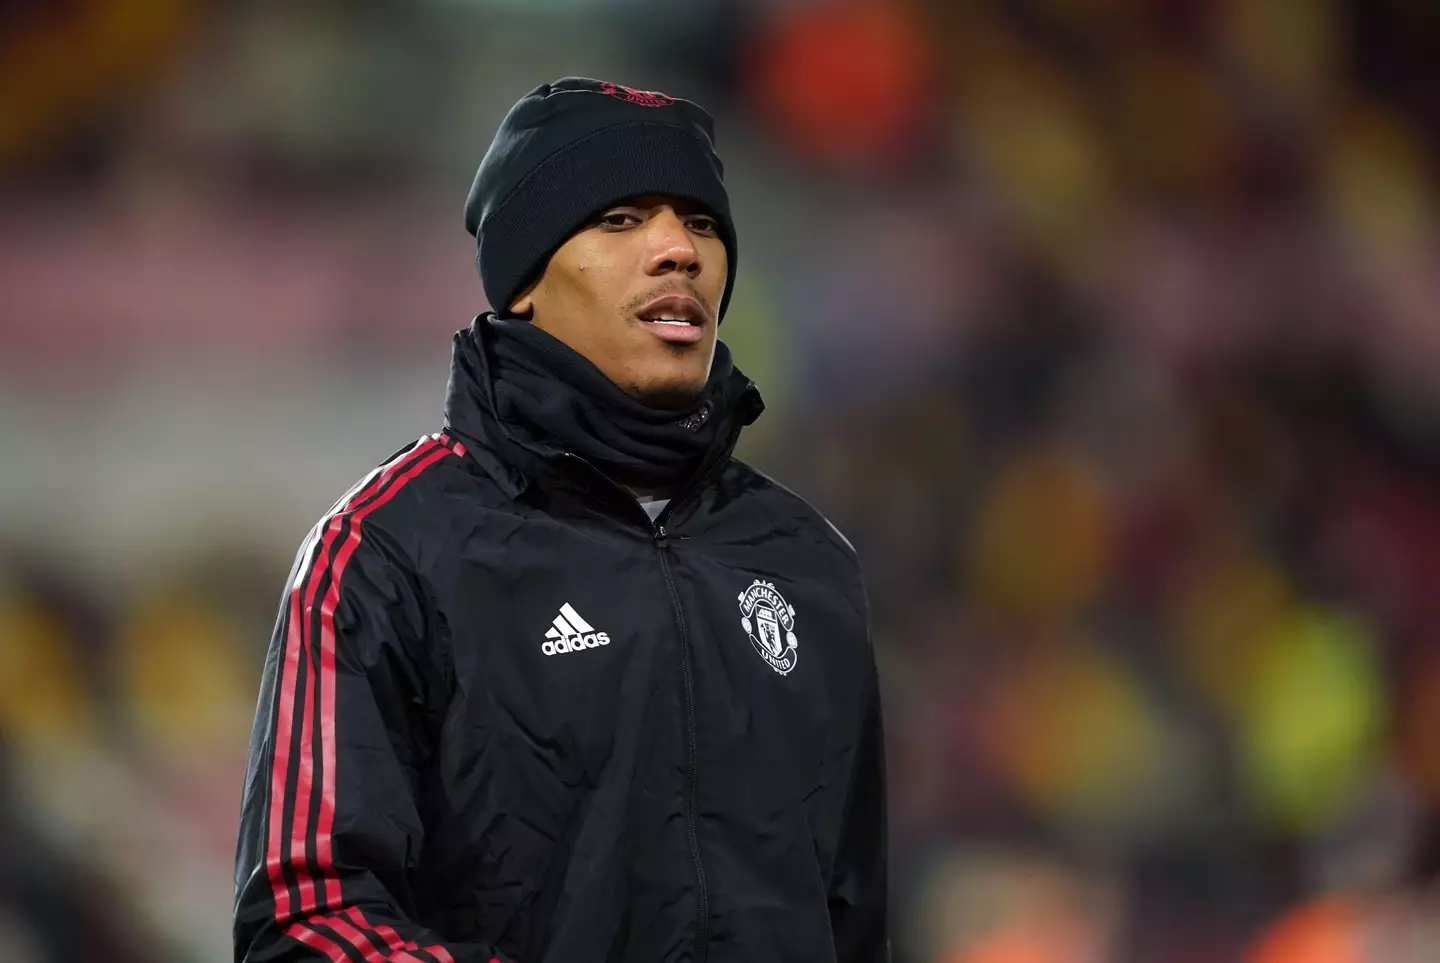 Martial could be sold in order to bring in funds for Ten Hag. Image: Alamy